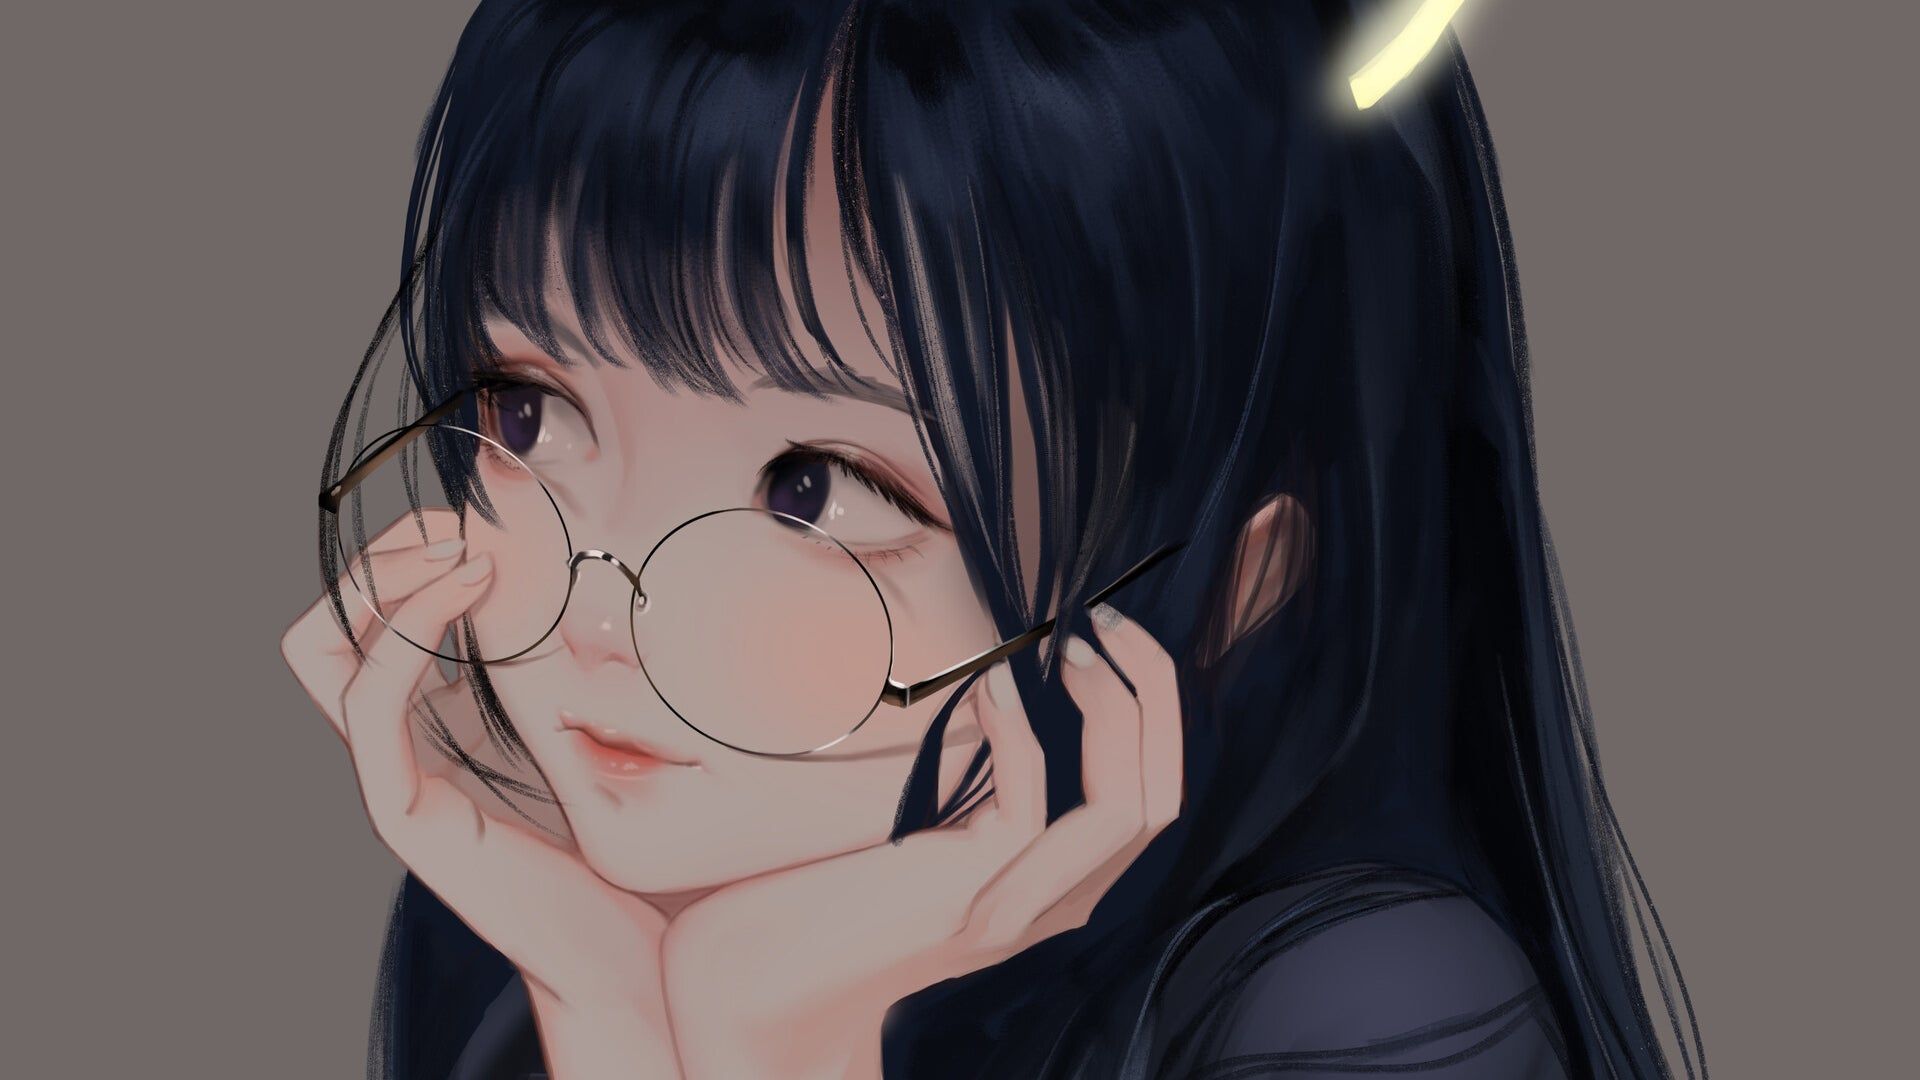 Cute Anime Girl with Glasses – Wallpapers Dist